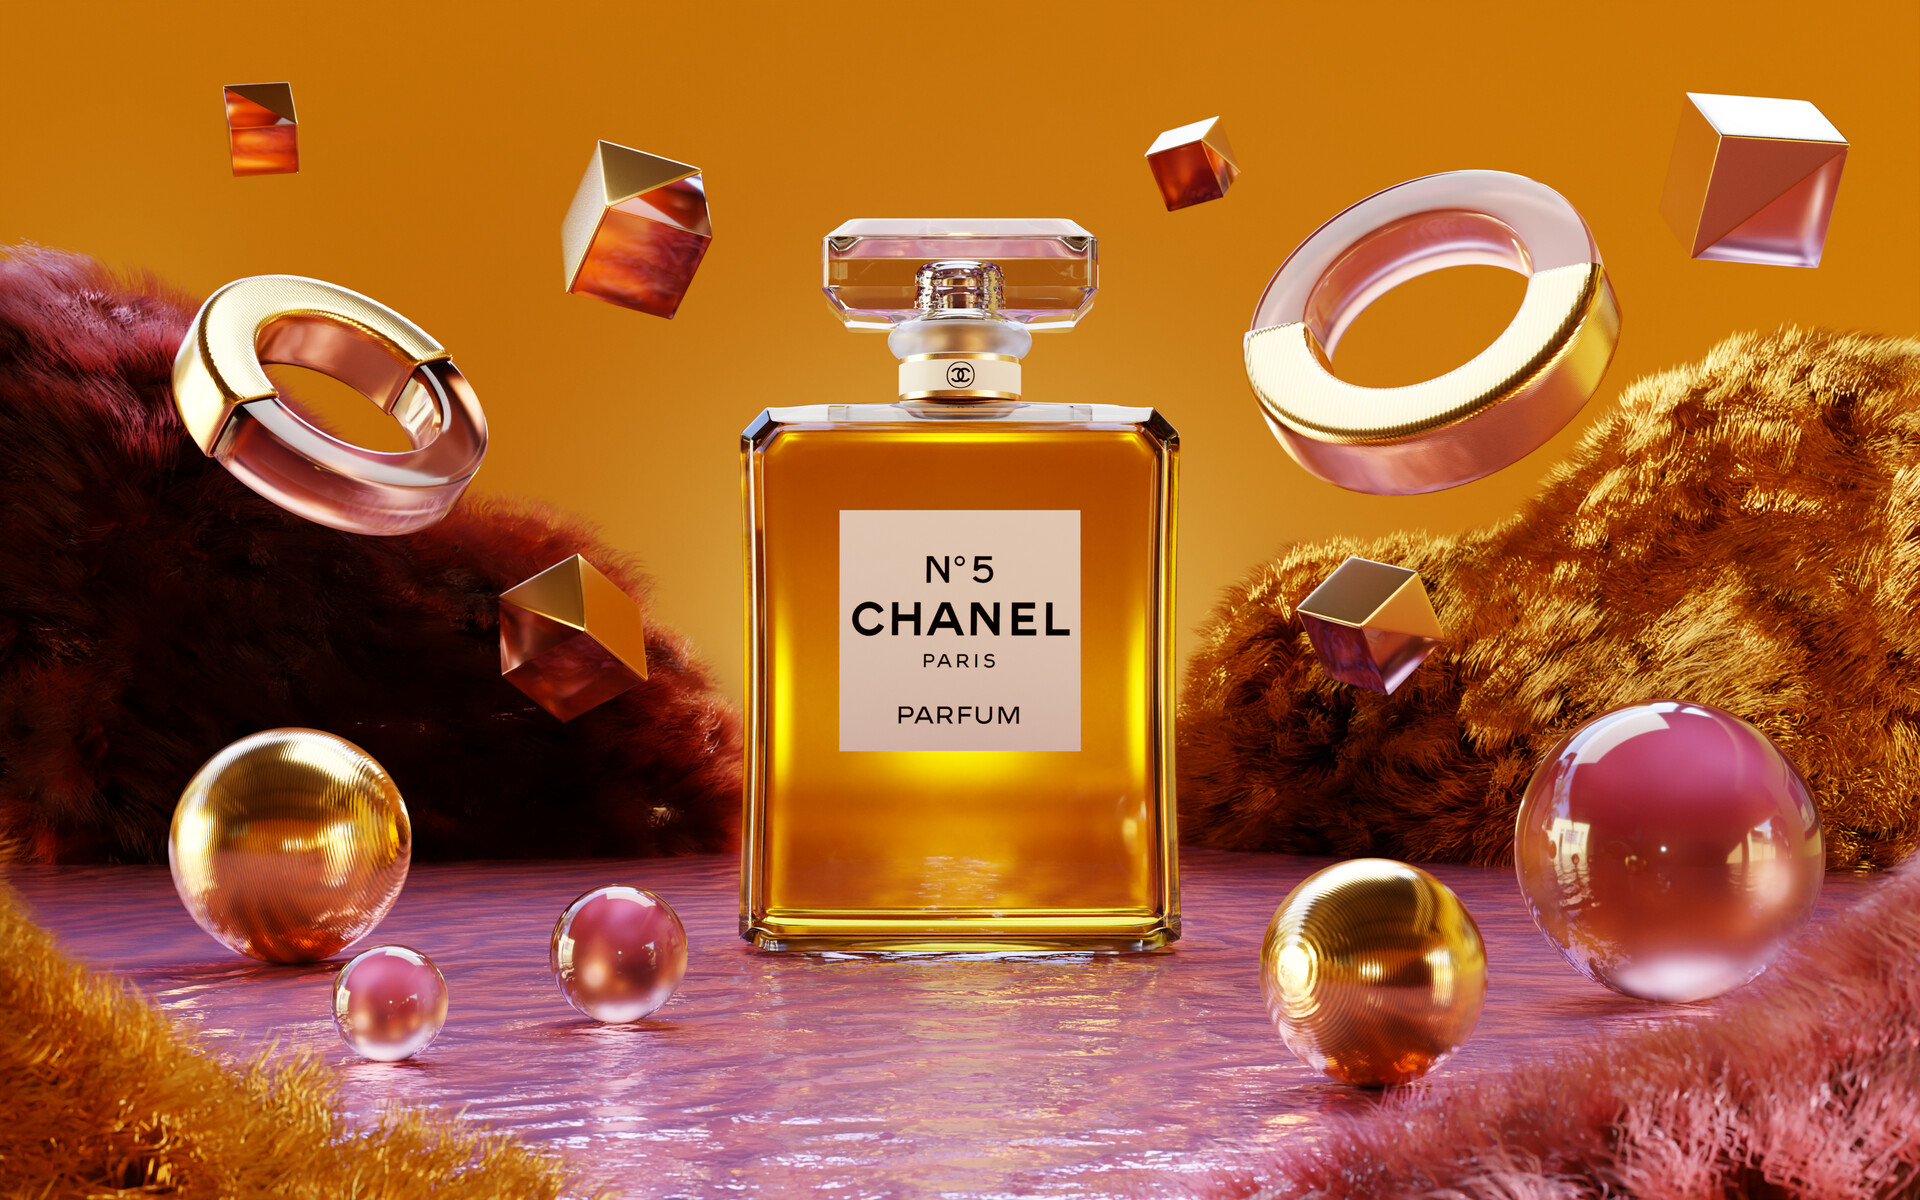 Chance by CHANEL Fragrances for sale